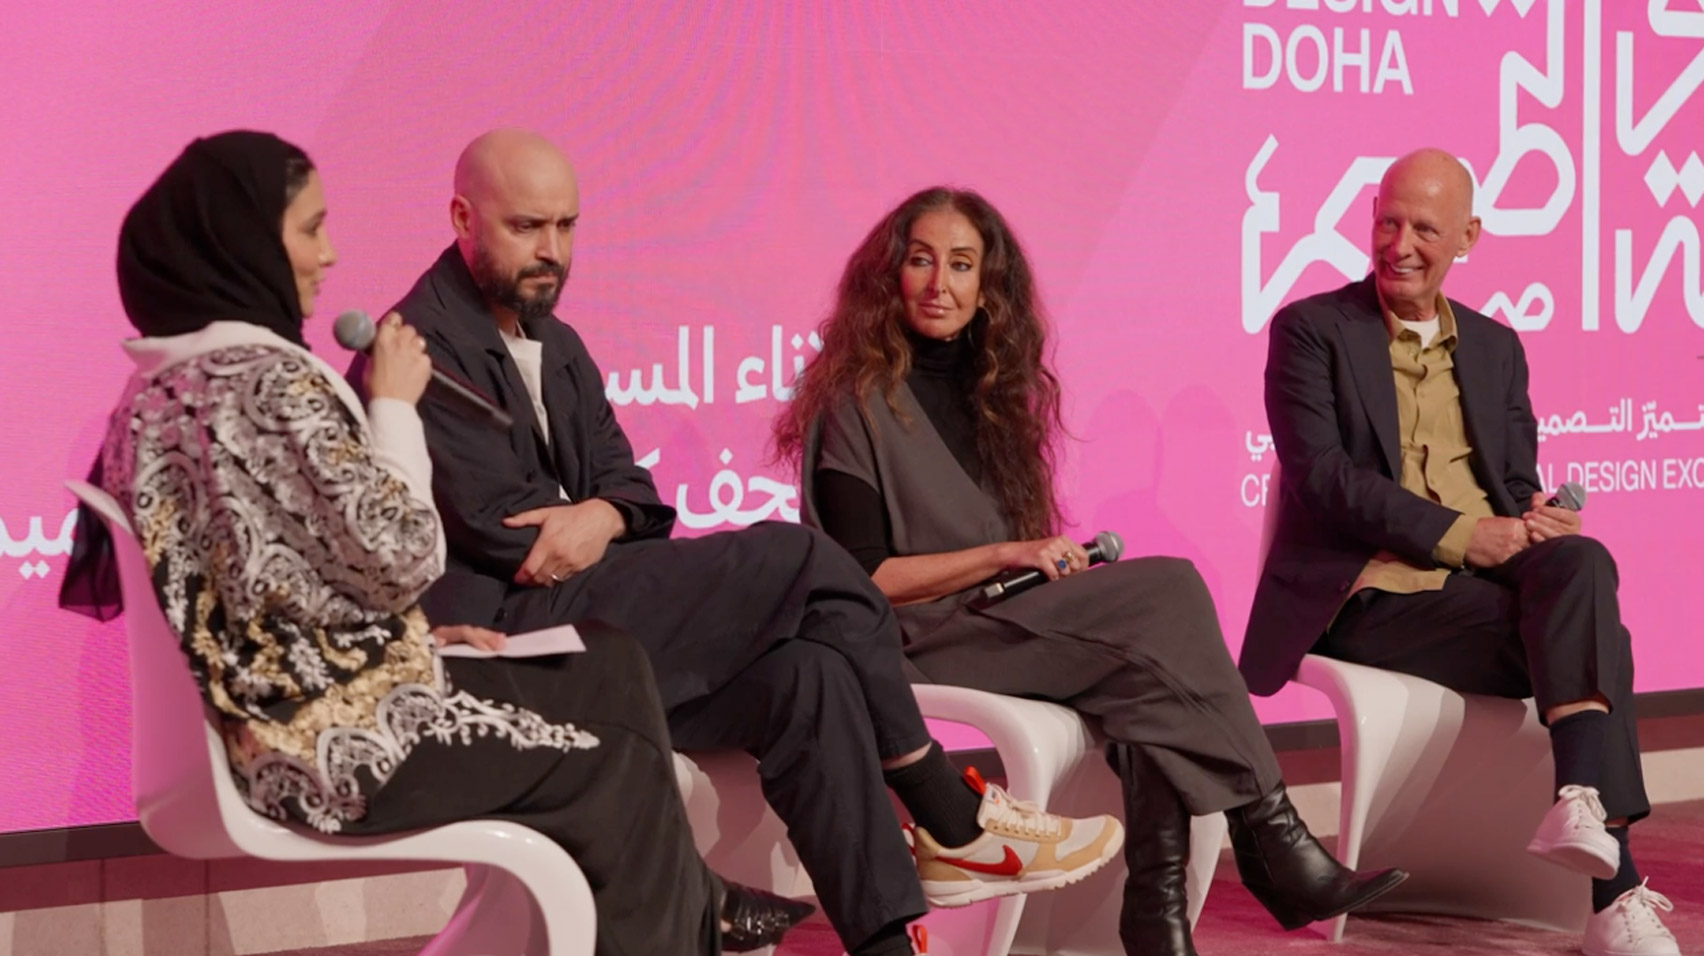 Video still of Samir Bantal, Manuela Lucà-Dazio and Ben van Berkel sitting on stage at a panel at the Design Doha Forum with a bright pink screen behind them